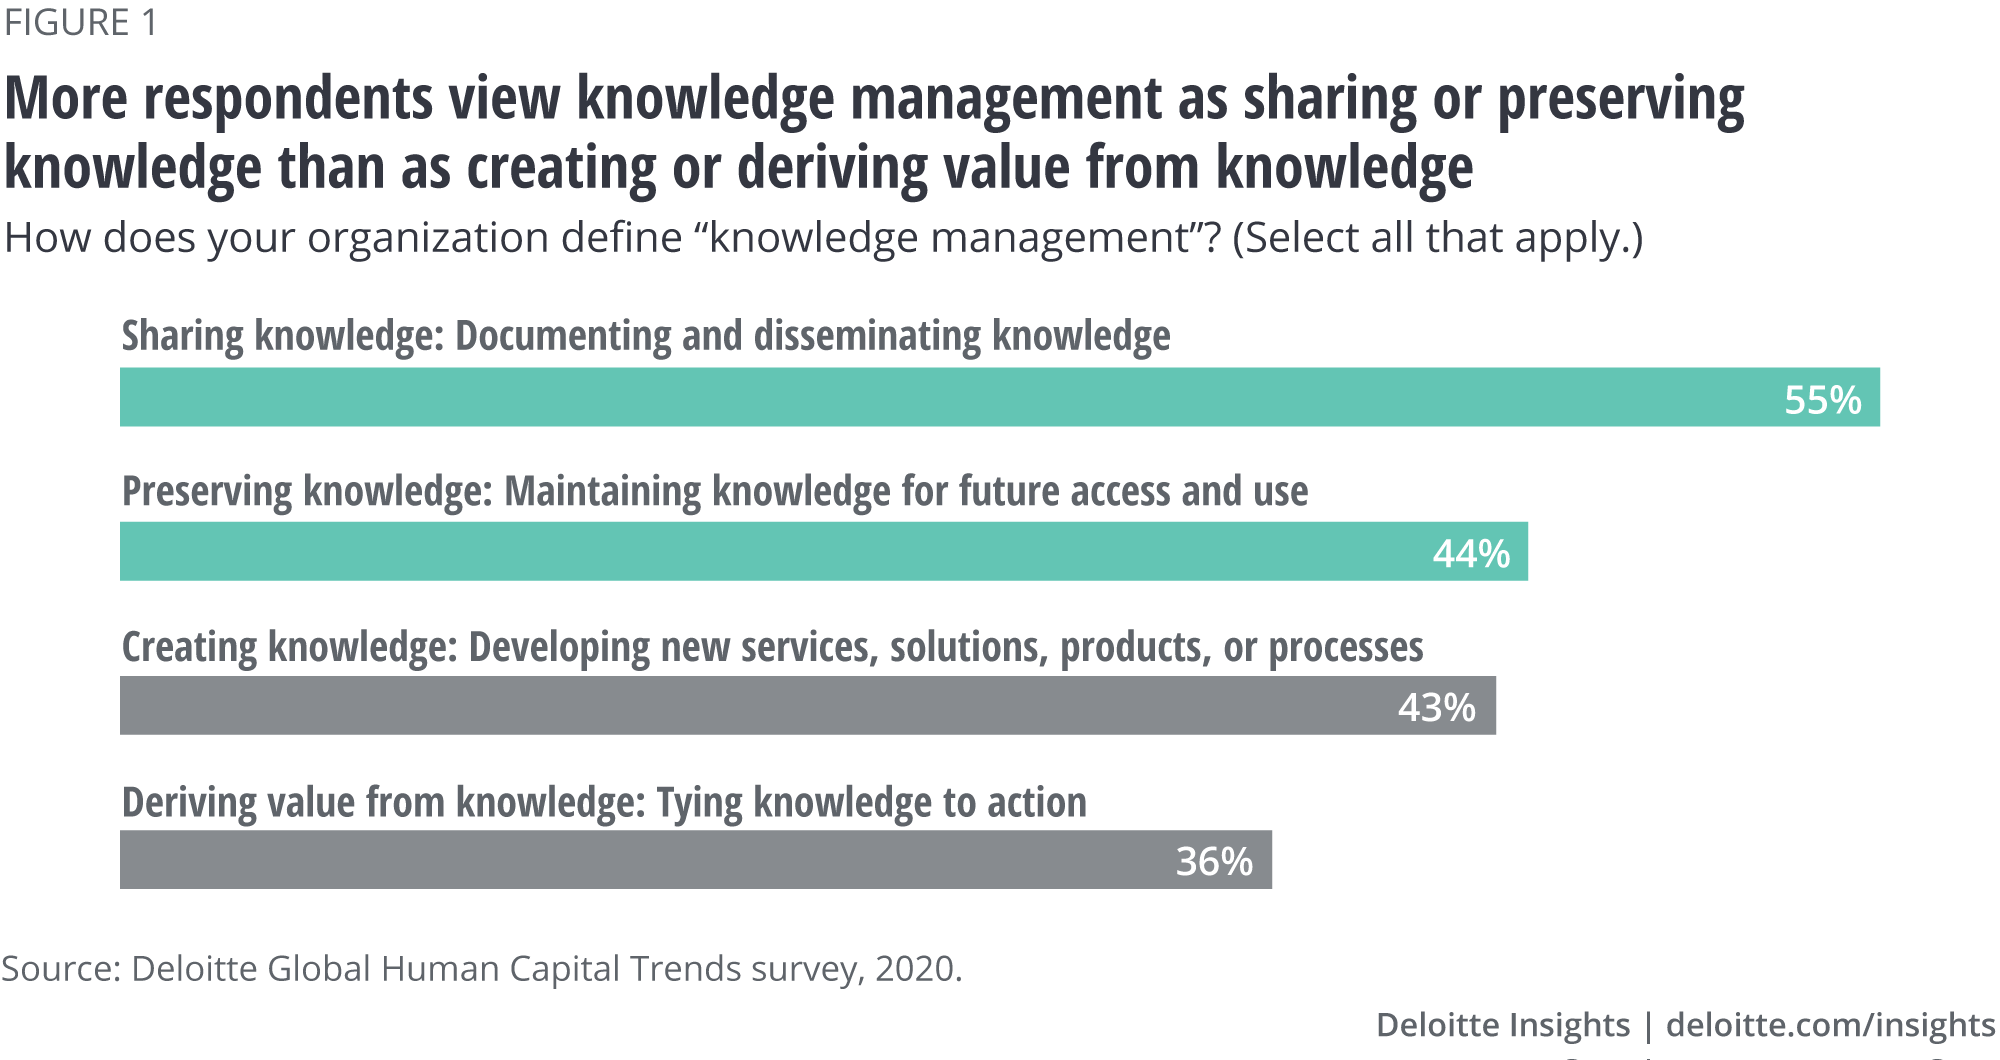 More respondents view knowledge management as sharing or preserving knowledge than as creating or deriving knowledge